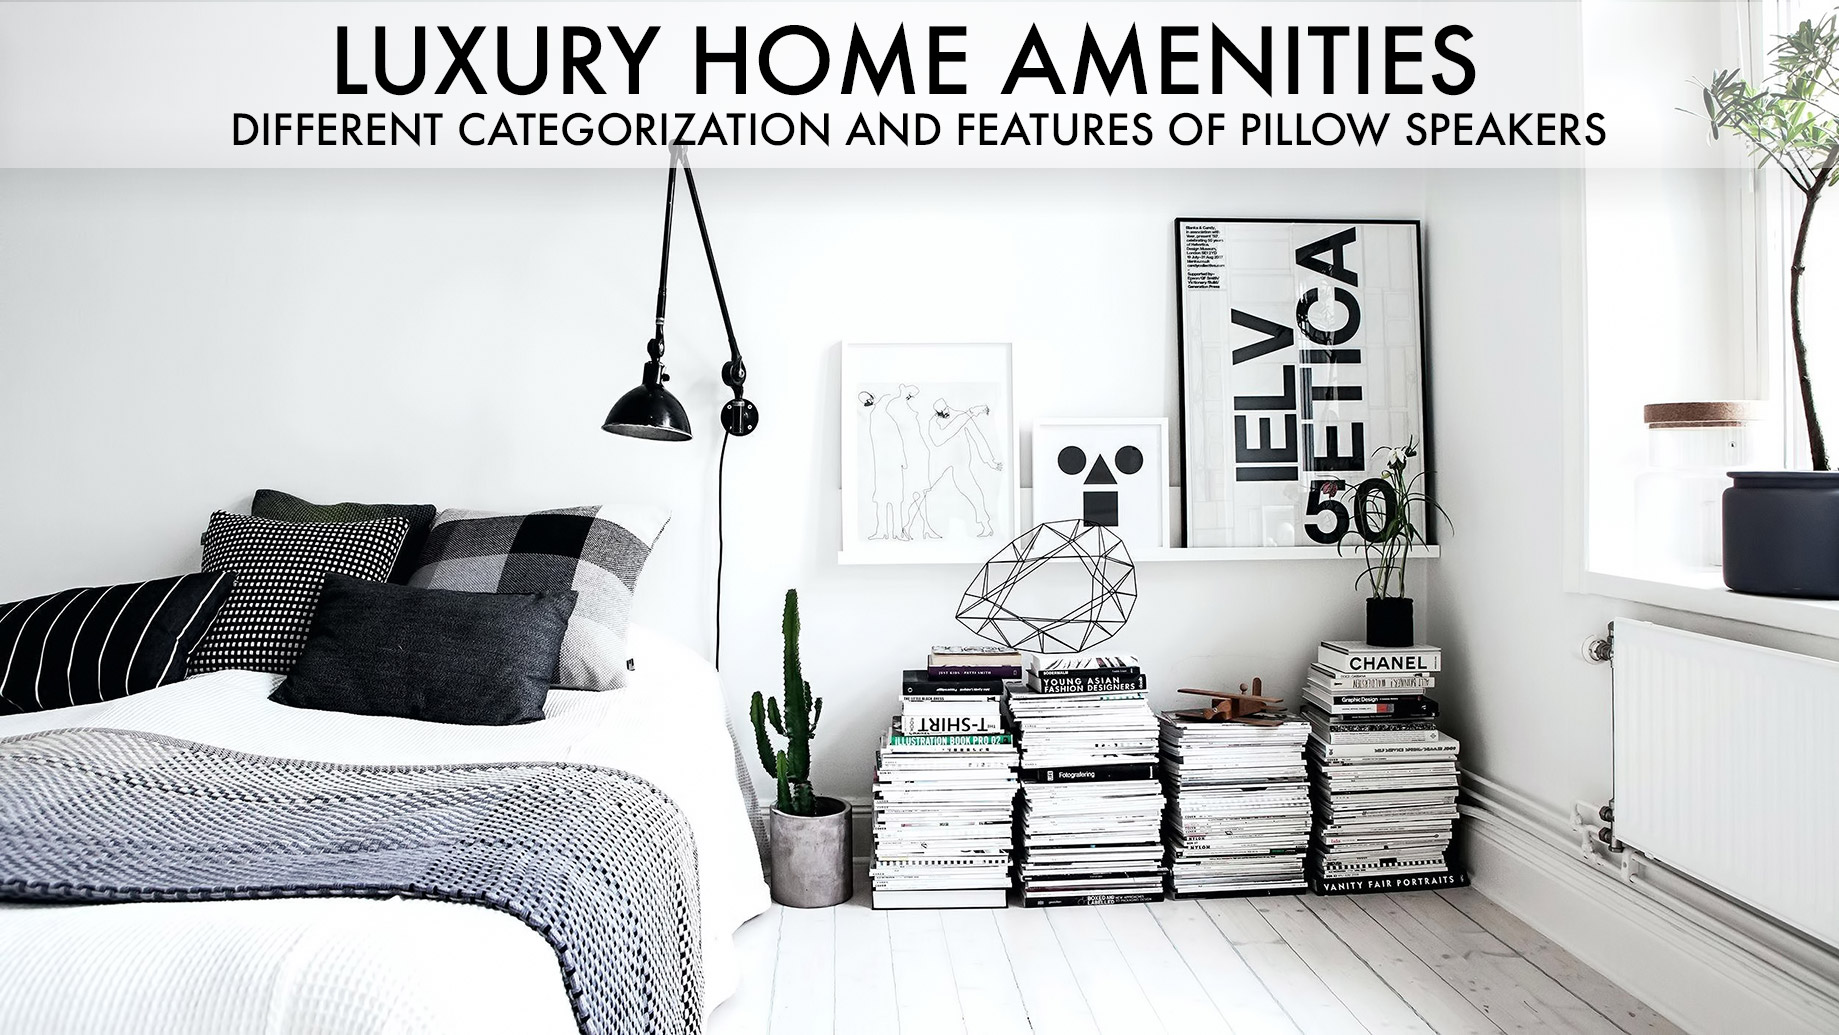 Luxury Home Amenities - Different Categorization and Features of Pillow Speakers